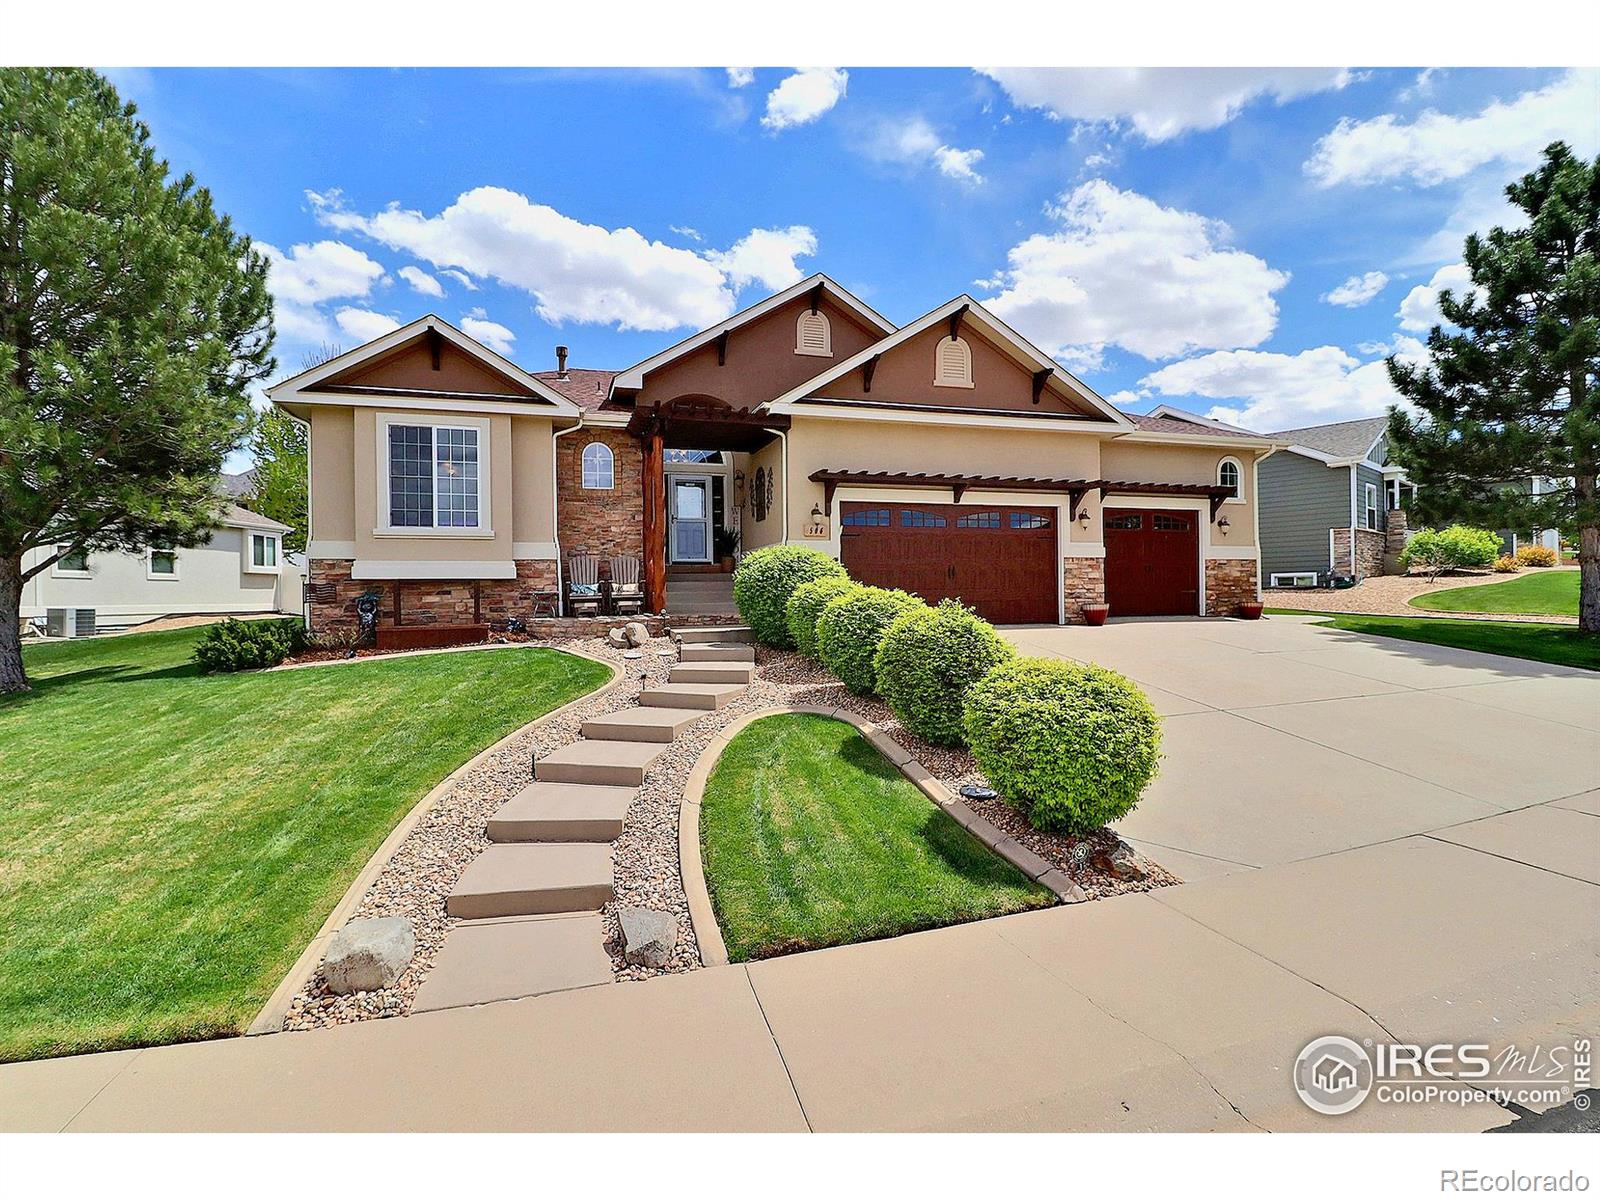 506  58th Avenue, greeley MLS: 4567891009170 Beds: 4 Baths: 4 Price: $785,000